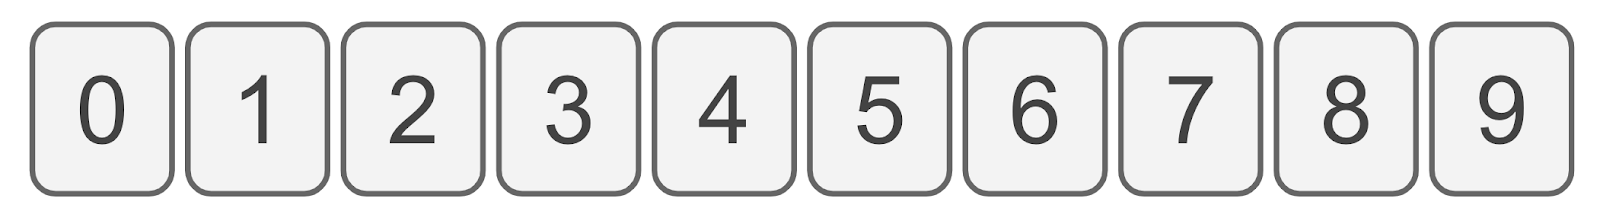 A series of numbers from 0 to 9.